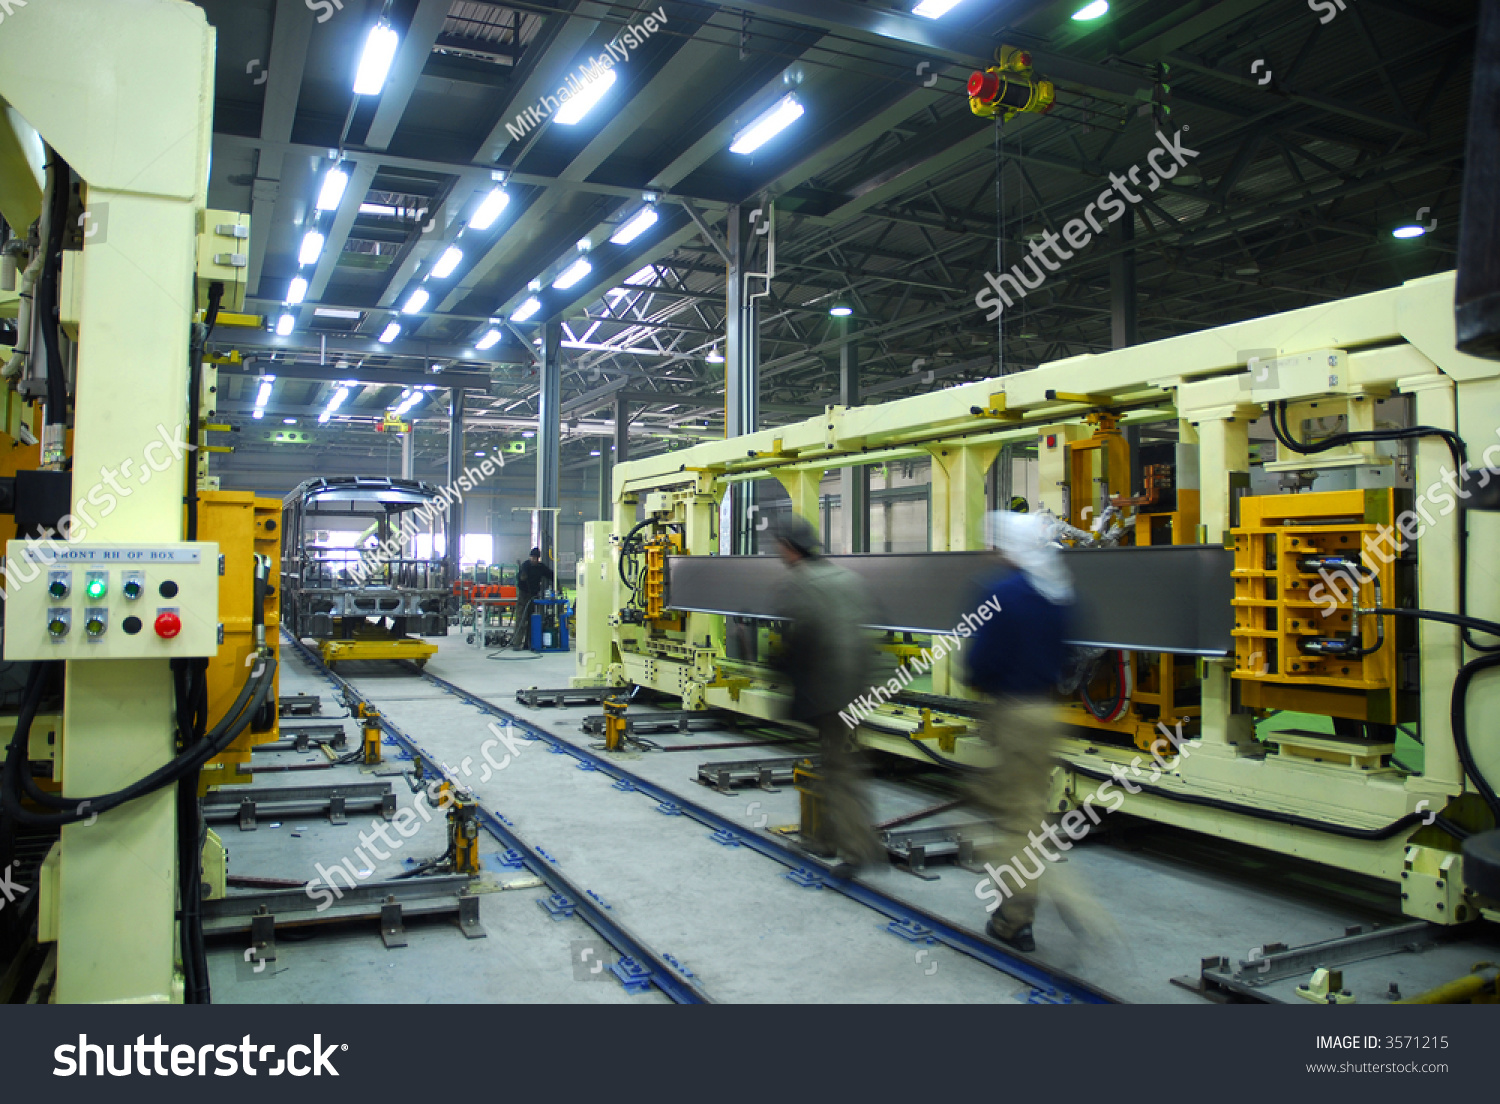 Big Factory With A Lot Of Machine Tools.8 Stock Photo 3571215 ...